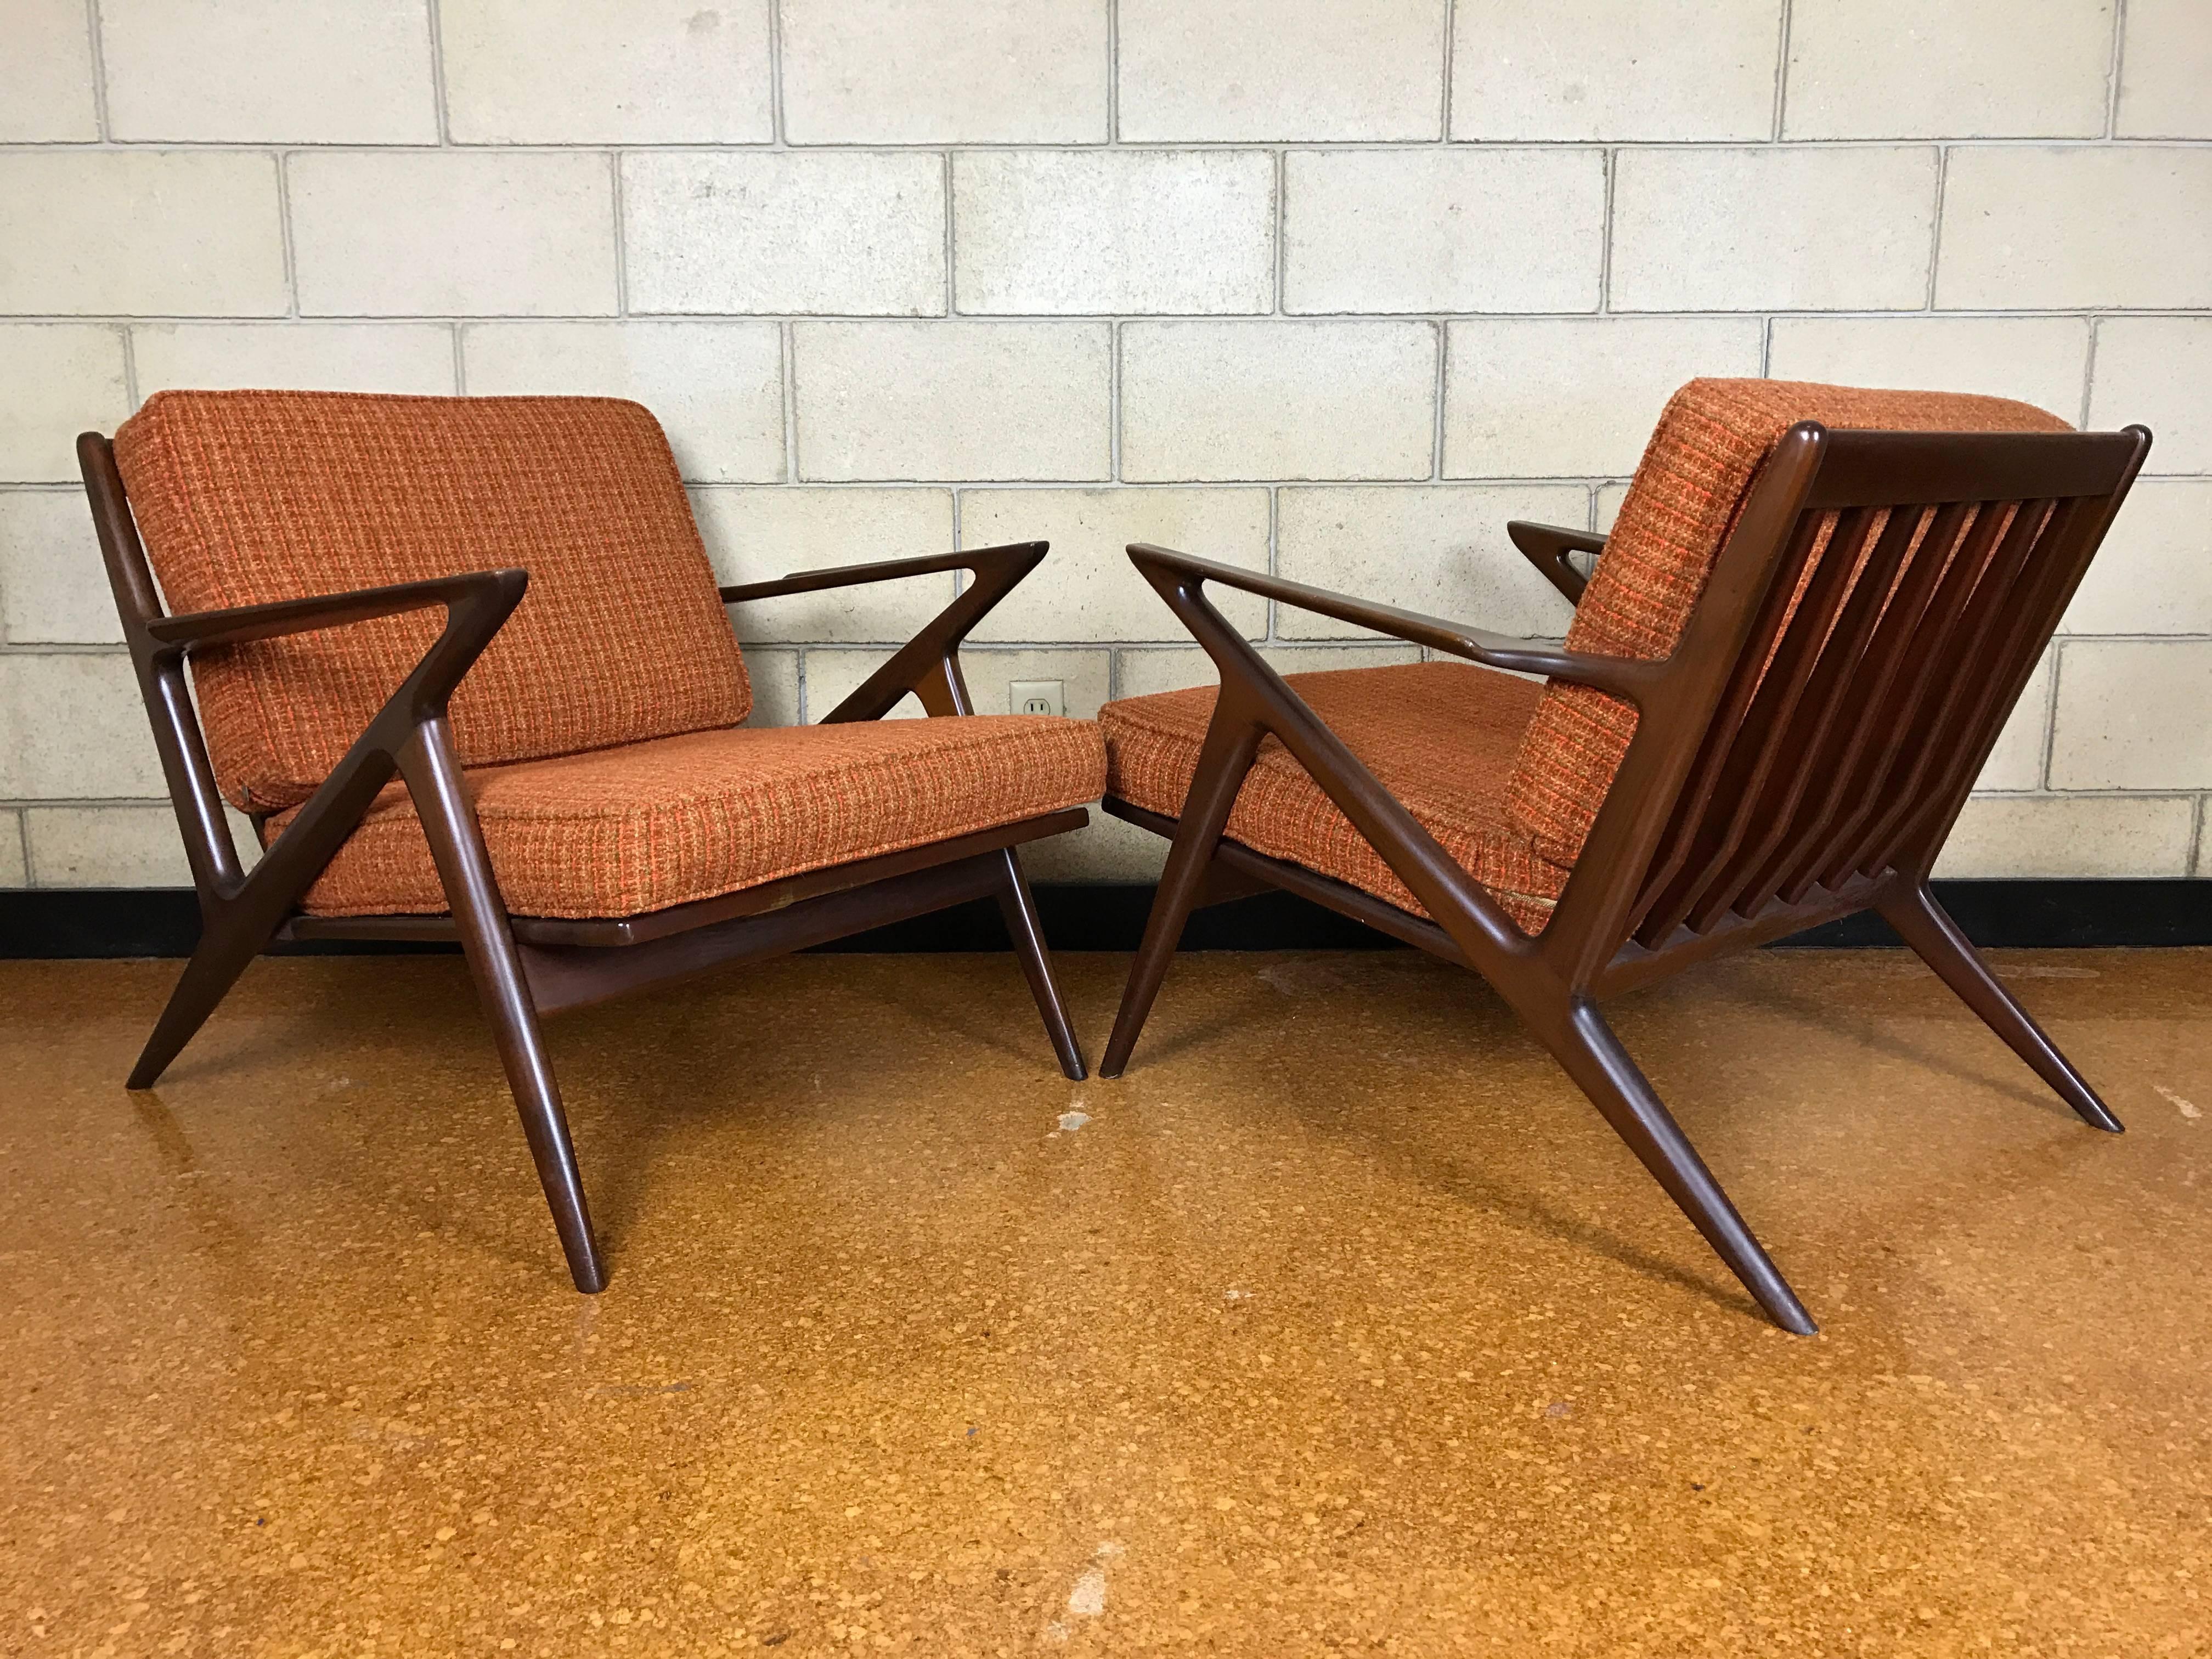 A classic and smart design by Poul Jensen. The Z chair is a standout amongst the Danish modern lounge chairs having stunning, sharp lines and a perfectly angled backrest. Own this pair today. 

(These can be disassembled for cheaper shipping if